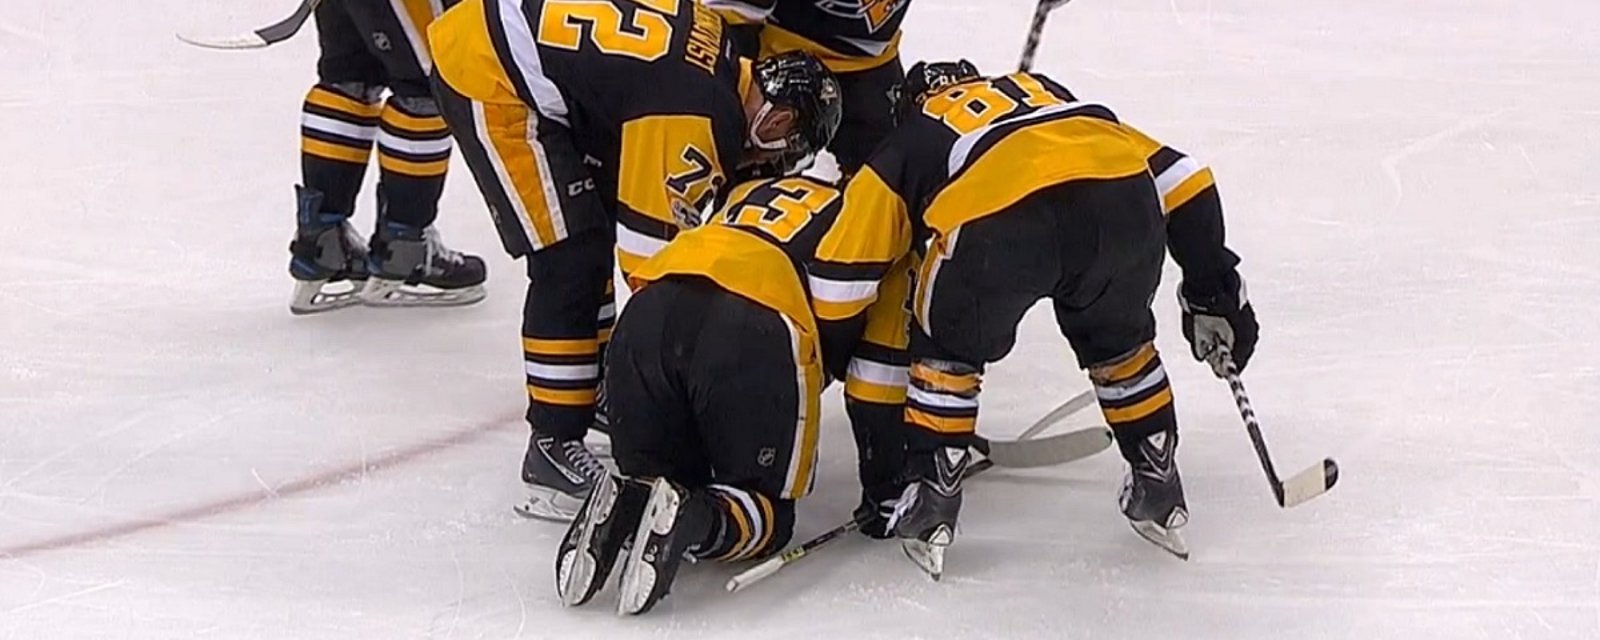 Breaking: Penguins forward can't stand after blocking huge shot from Subban.